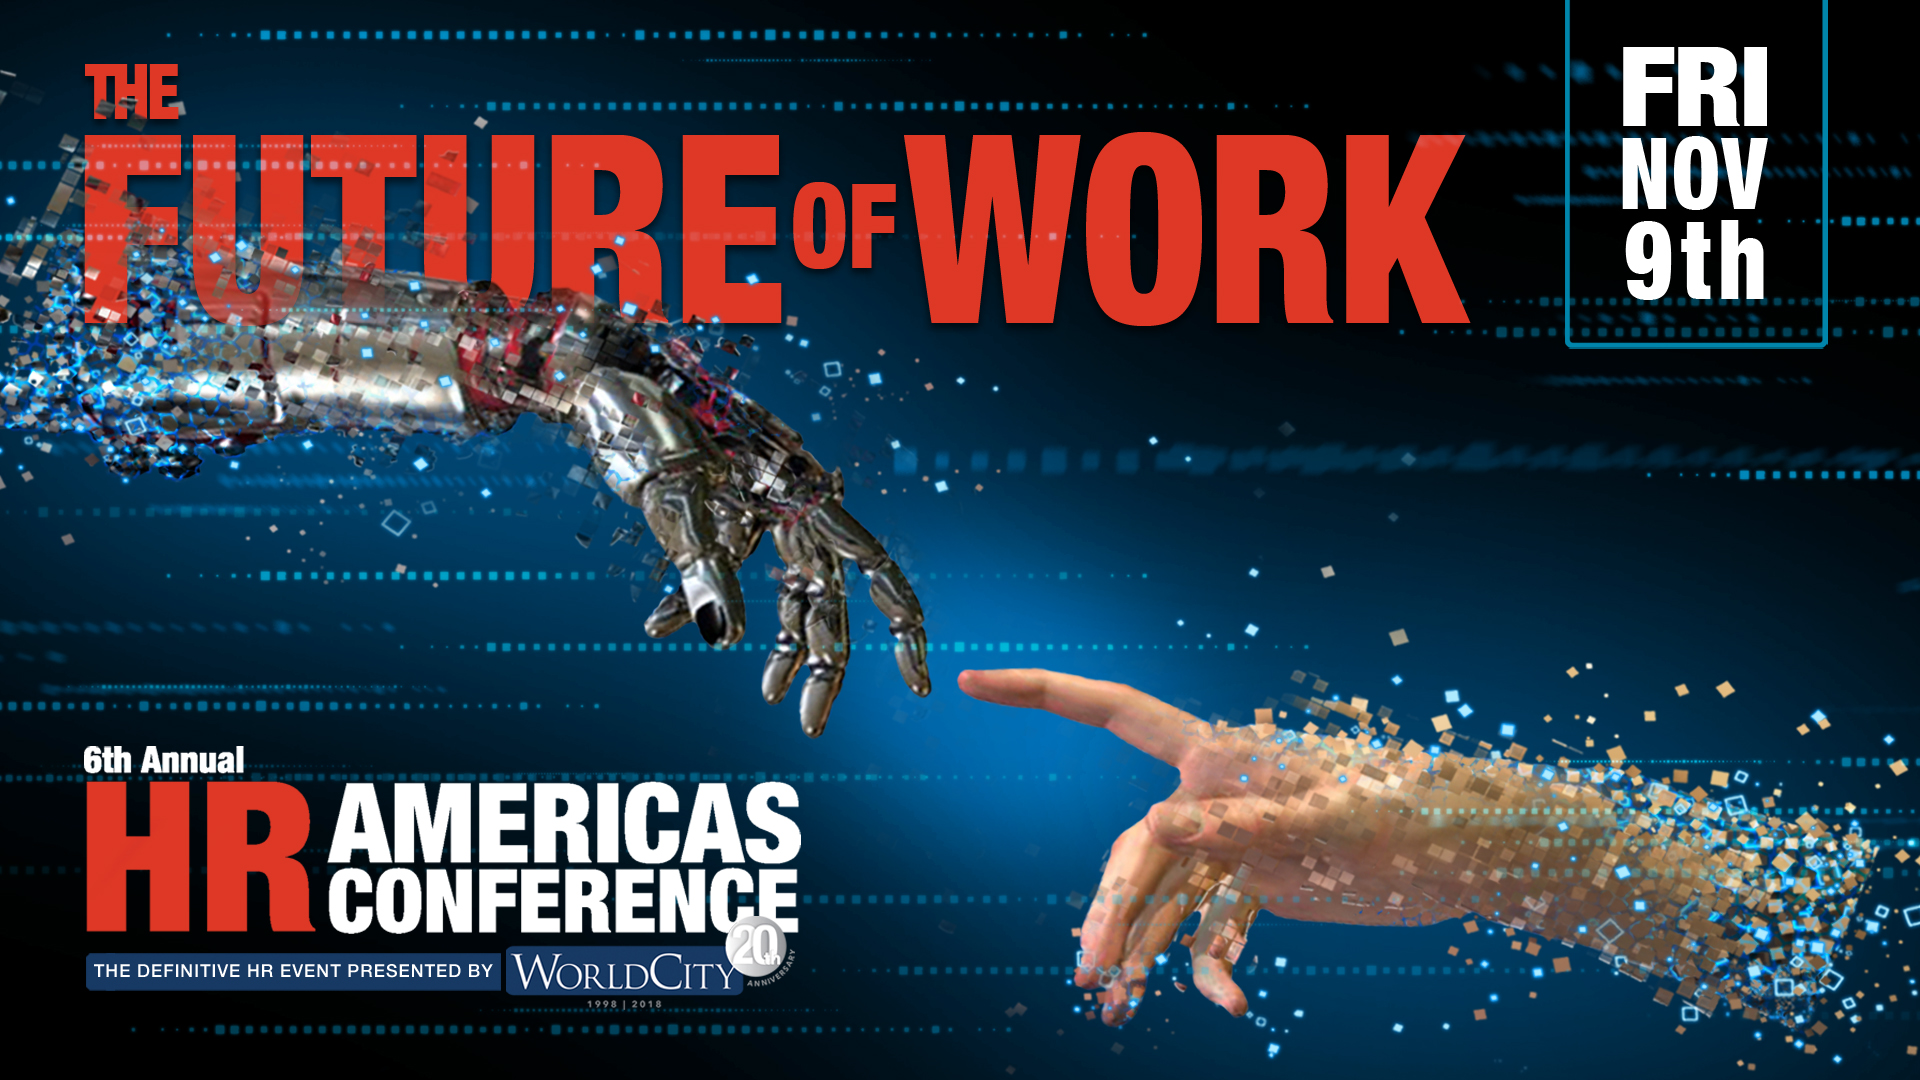 HR Americas - The Future of Work